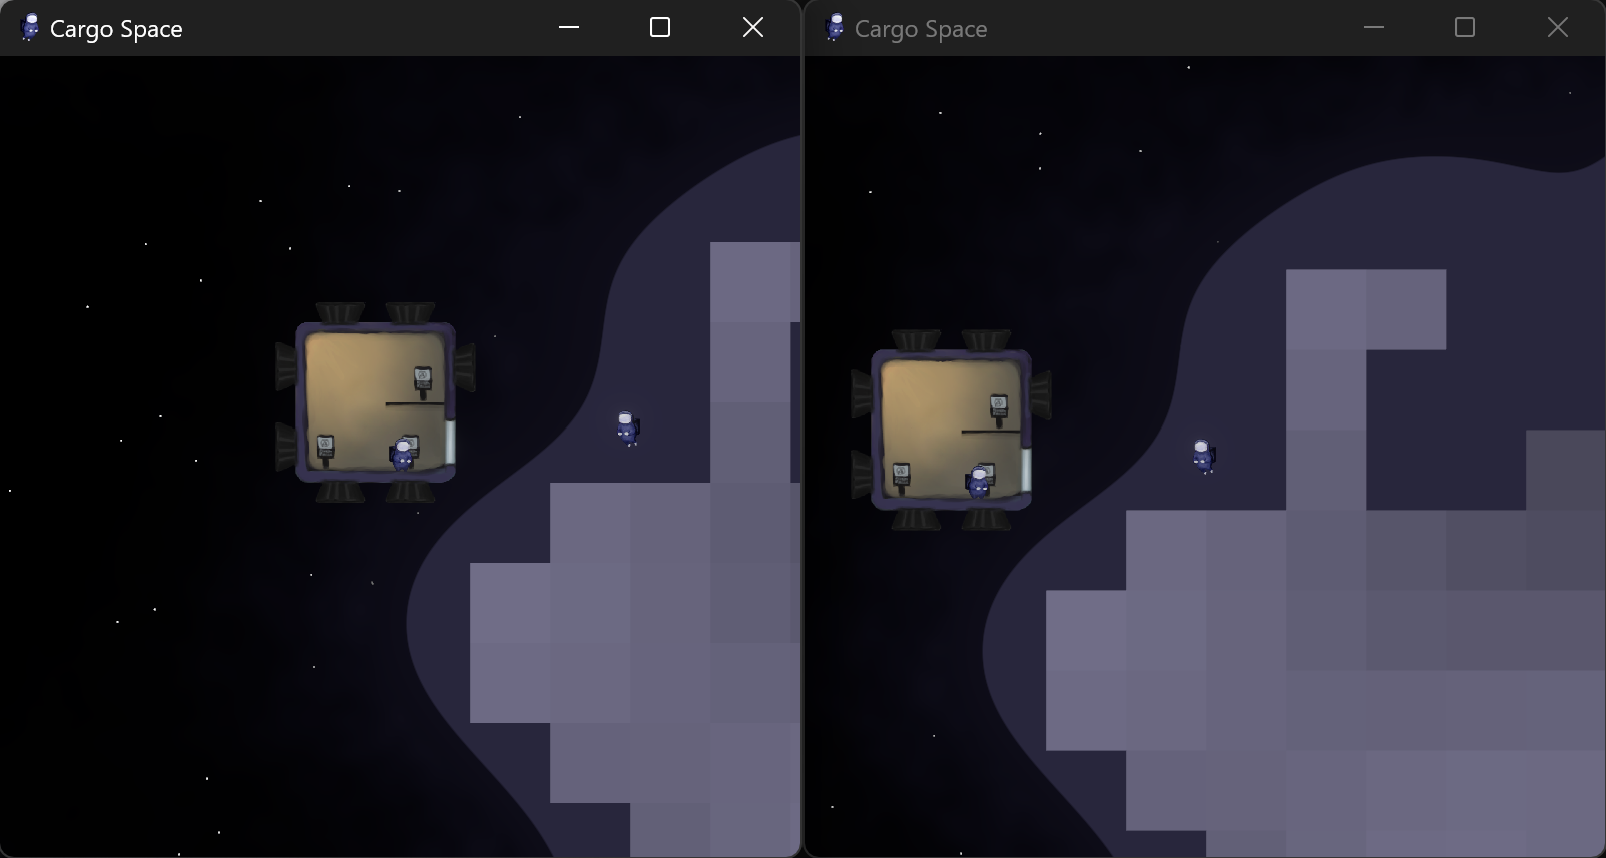 cargo space screenshot: two instances of the game running in parallel